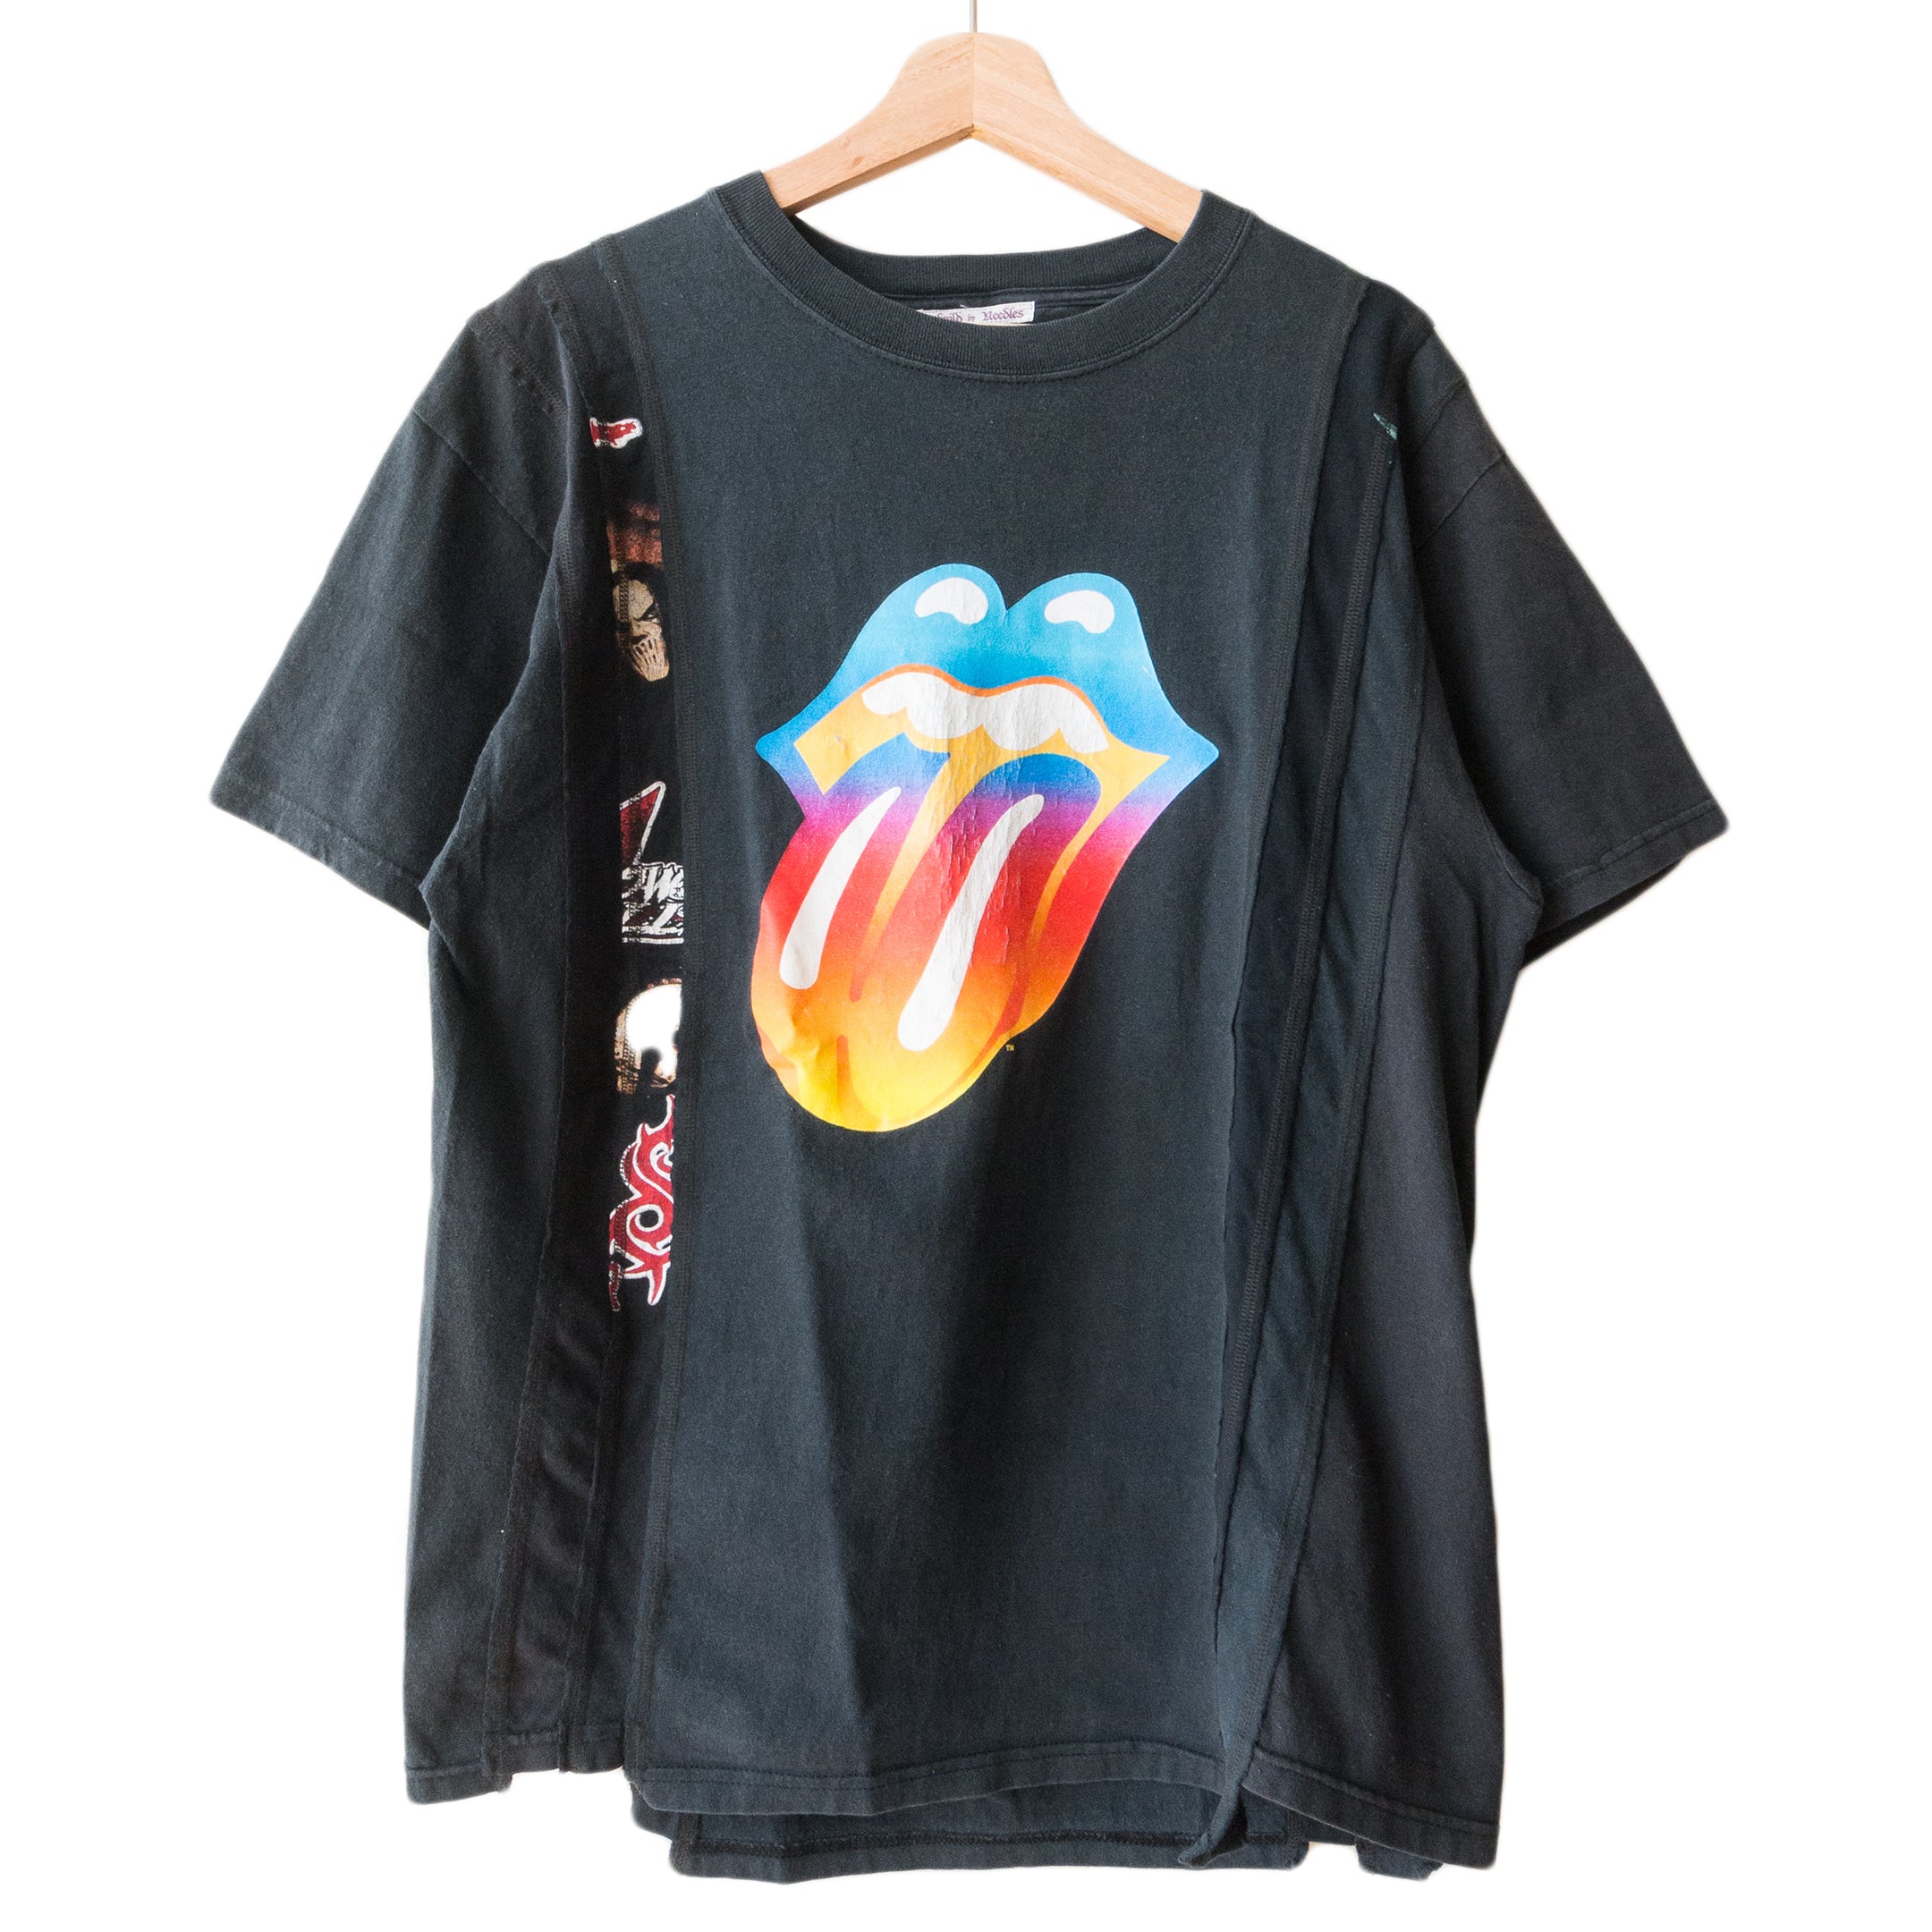 Rebuild by Needles rolling stones size M | gualterhelicopteros.com.br